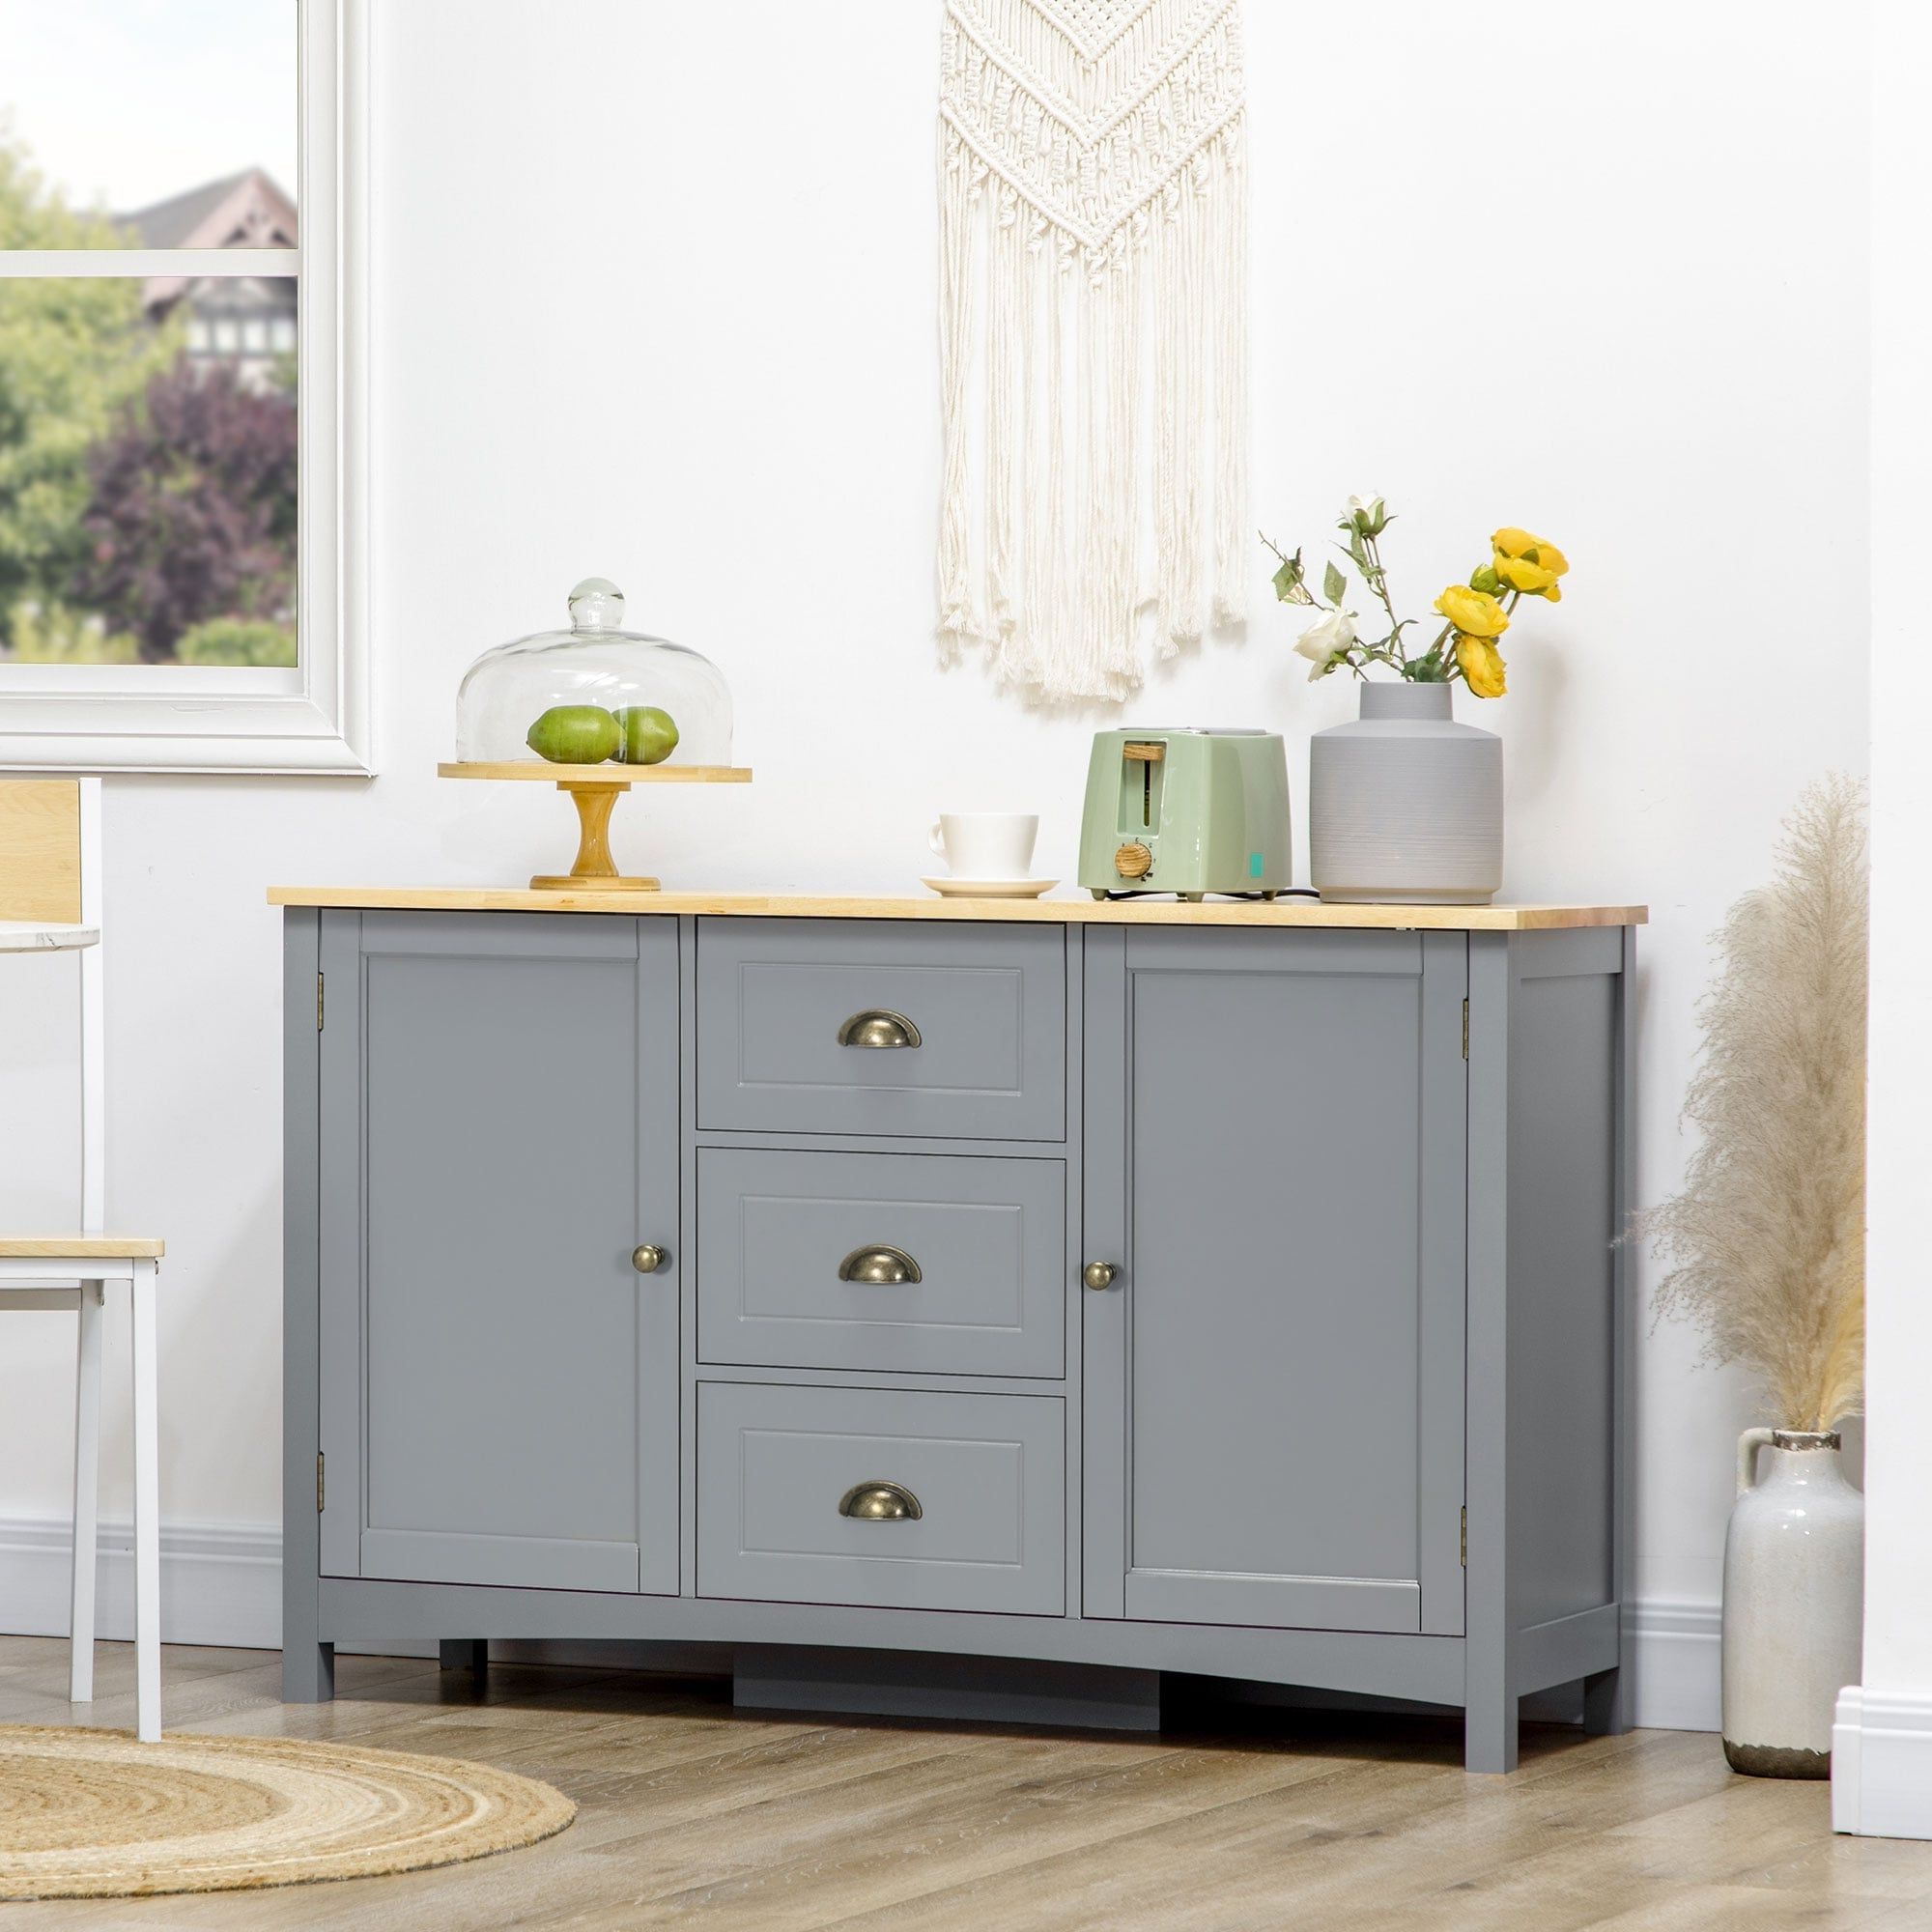 Homcom Sideboard Buffet Cabinet, Retro Kitchen Cabinet, Coffee Bar Cabinet  With Rubber Wood Top, Drawers, Entryway, Gray – Bed Bath & Beyond – 38858360 Inside Sideboards With Rubberwood Top (Gallery 4 of 20)